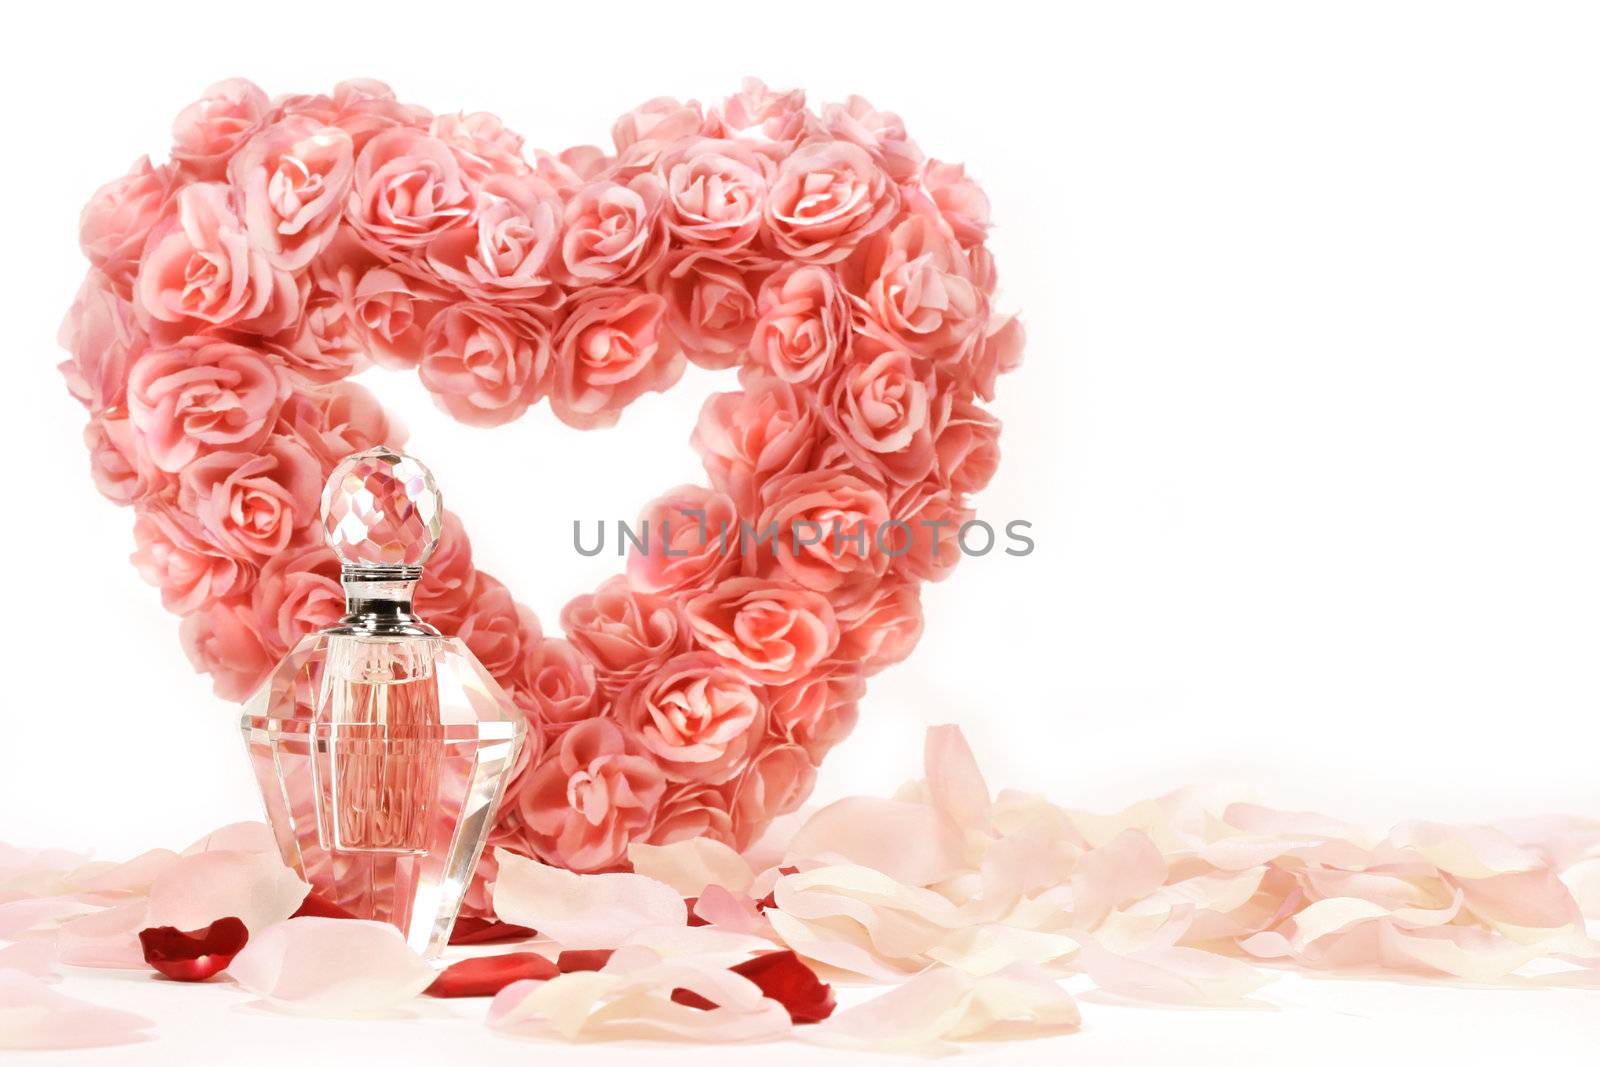 Heart of roses with perfume bottle by Sandralise